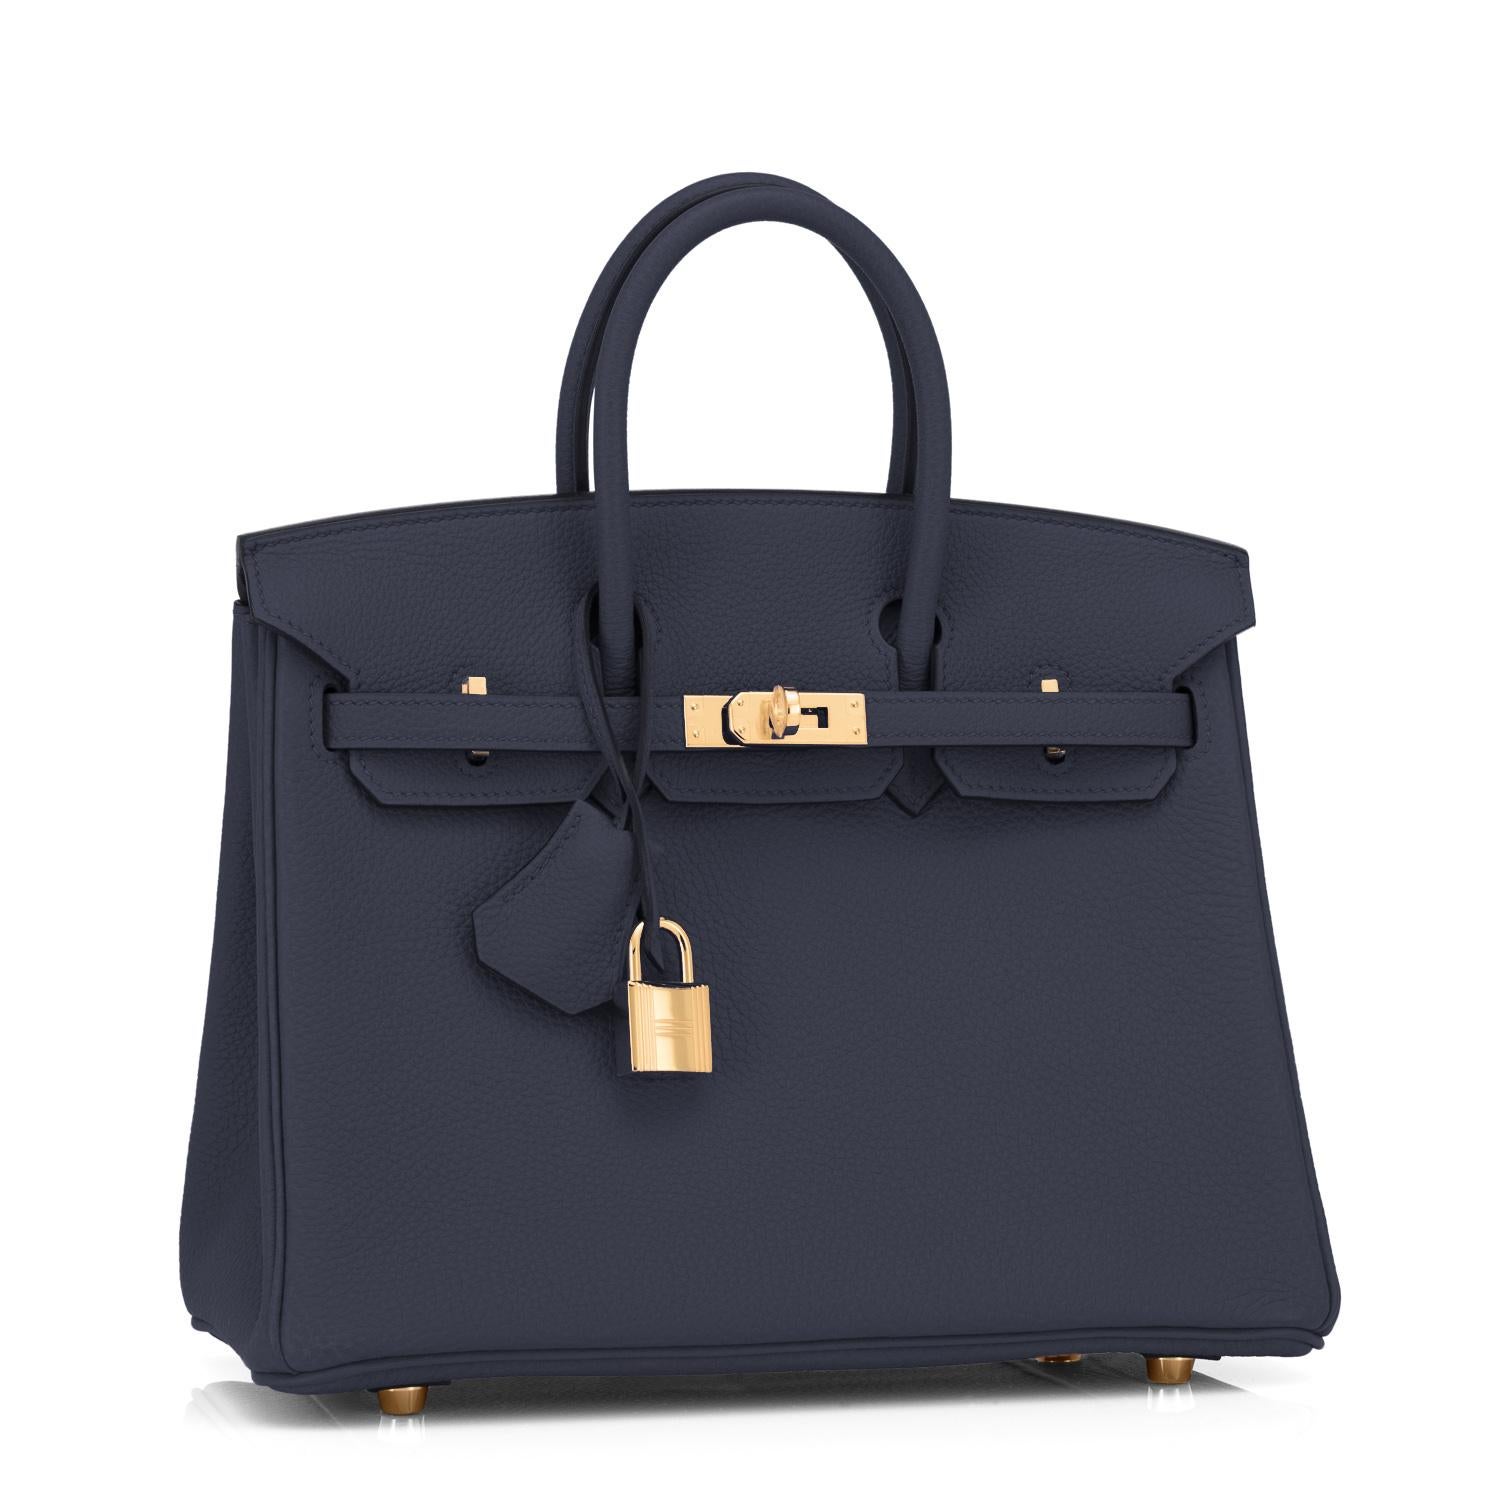 Hermes Birkin 25cm Blue Nuit Jewel-Toned Navy Gold Hardware Bag Z Stamp, 2021
Just purchased from Hermes store! Bag bears new interior 2021 Z Stamp.
Brand New in Box. Store fresh. Pristine Condition (with plastic on hardware)
Perfect gift!  Comes